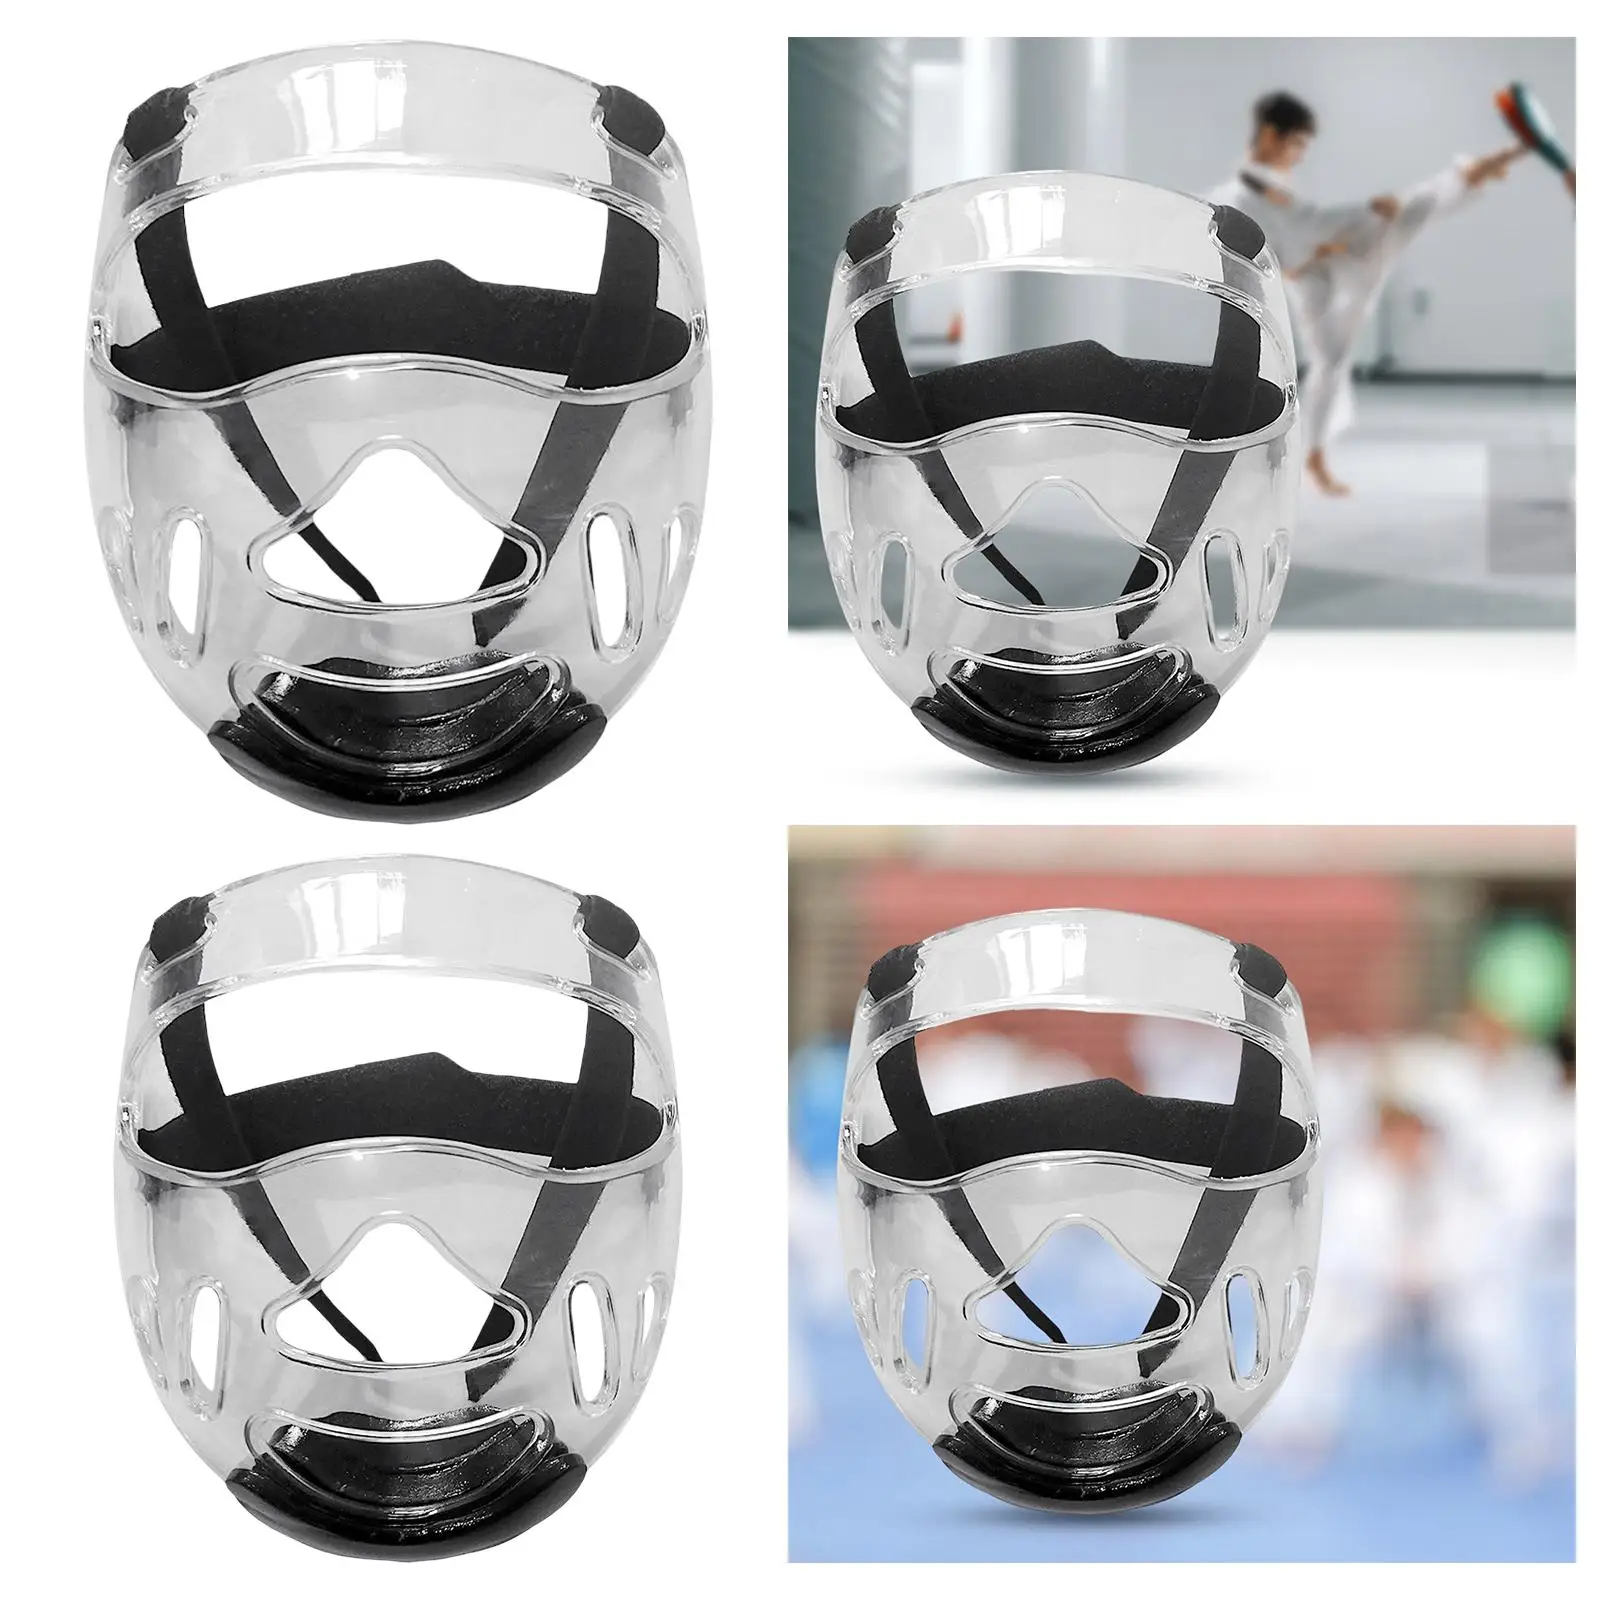 Transparent Taekwondo Face Shield Head Protector Sports Gear Boxing Headgear Helmet Cover for Improves Your Training Performance